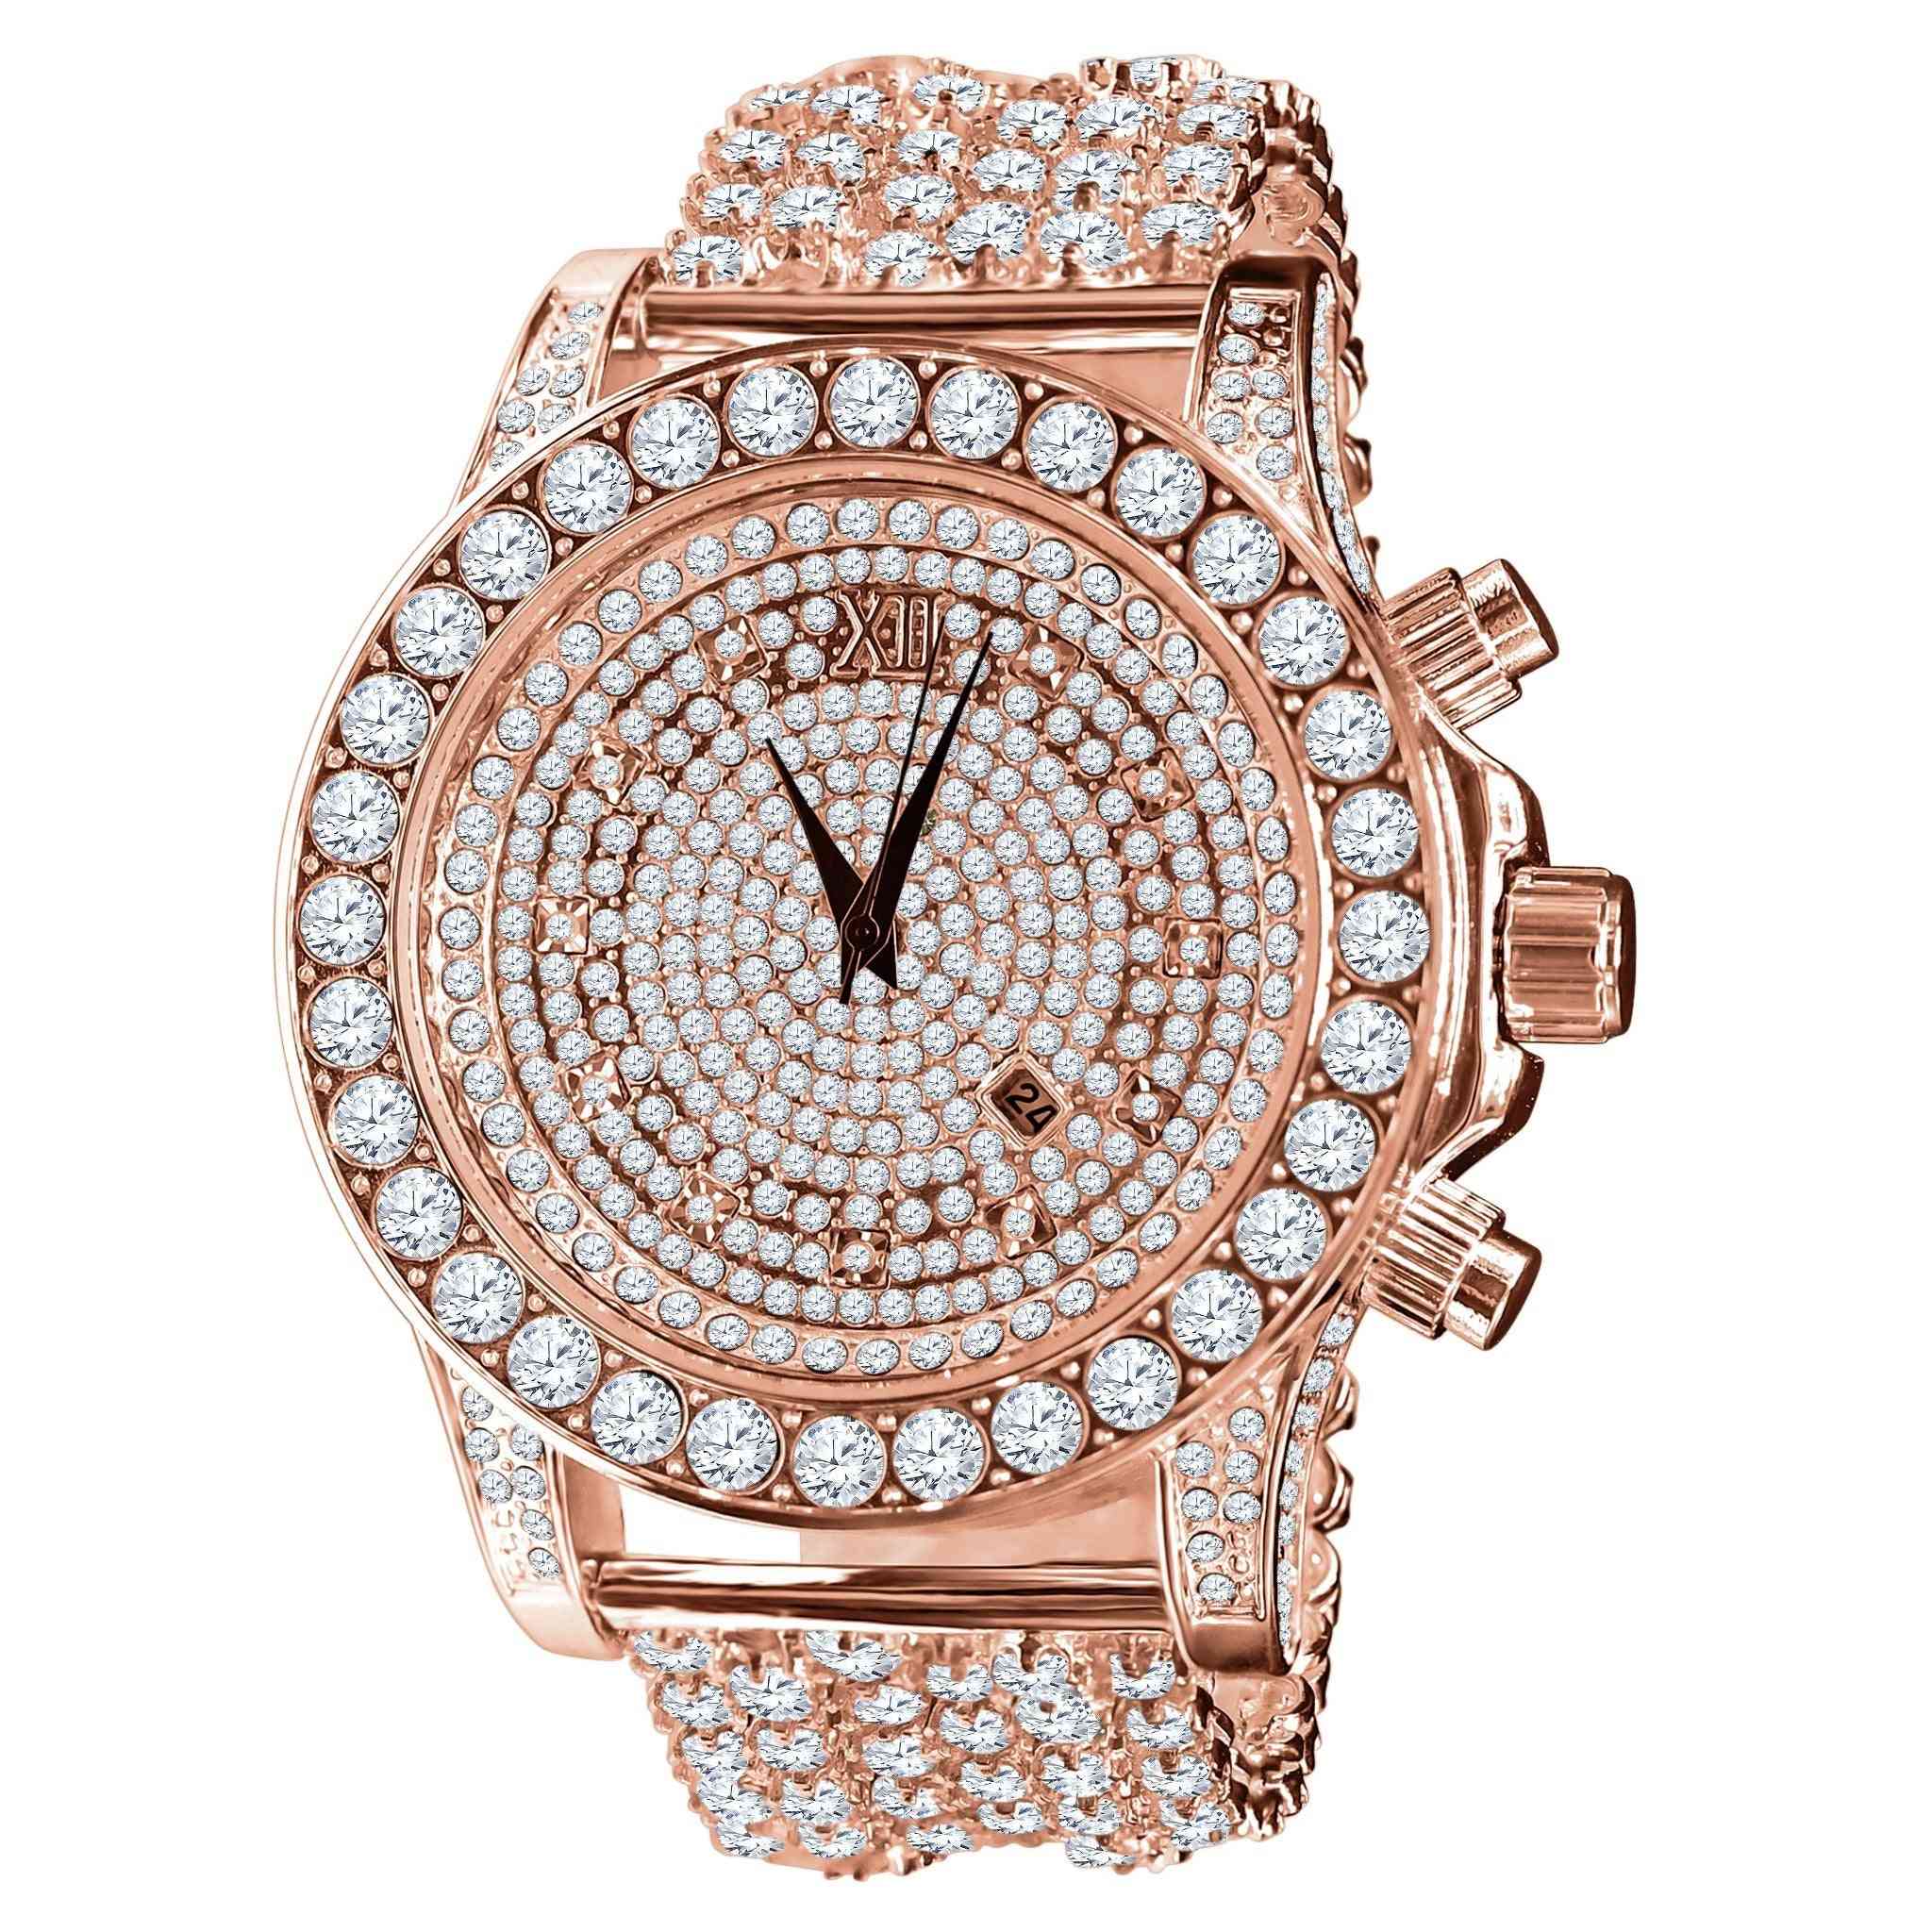 Burnish Cz Iced Out Watch